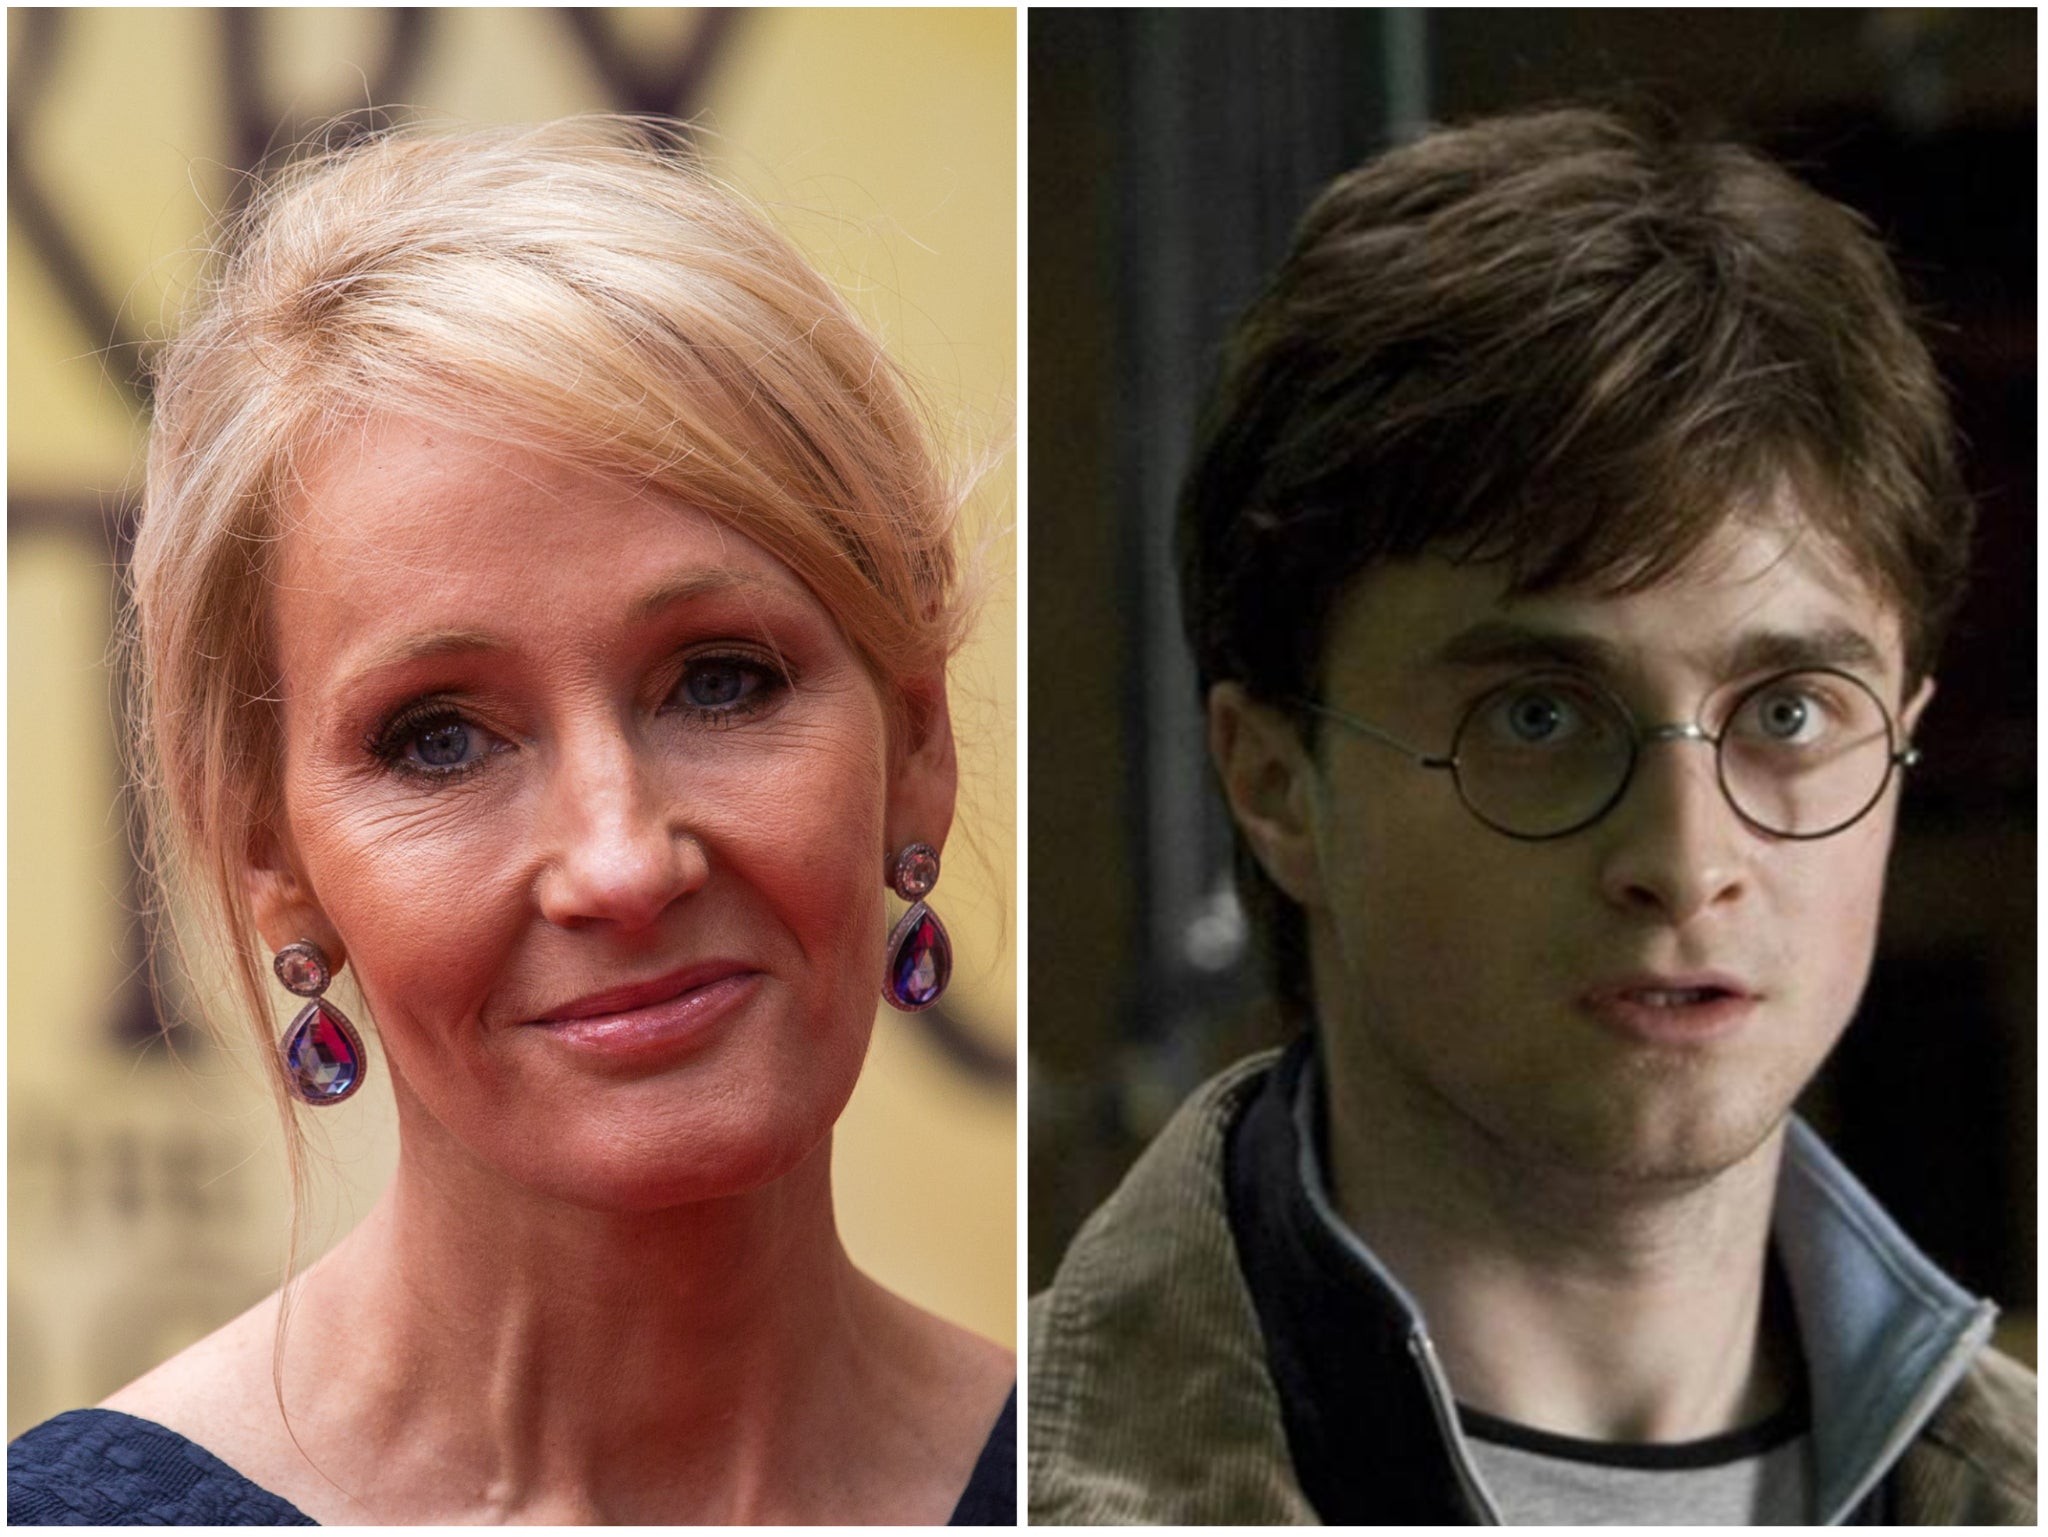 The Harry Potter TV series is officially happening, with JK